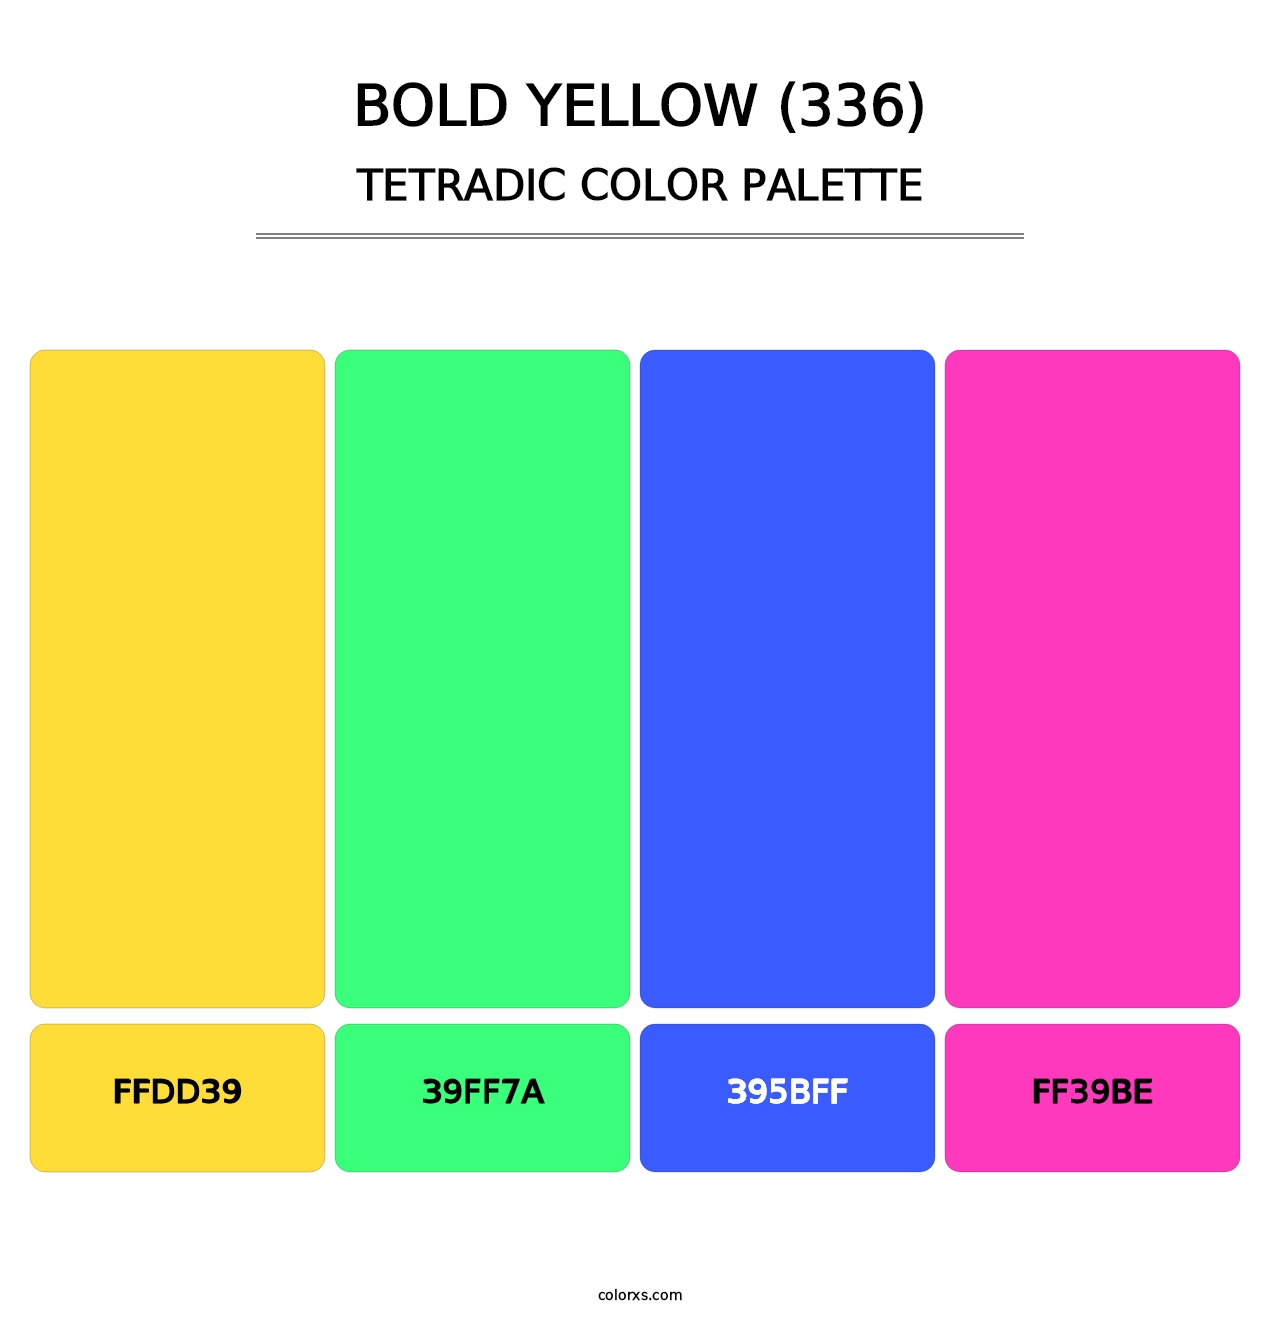 Bold Yellow (336) - Tetradic Color Palette